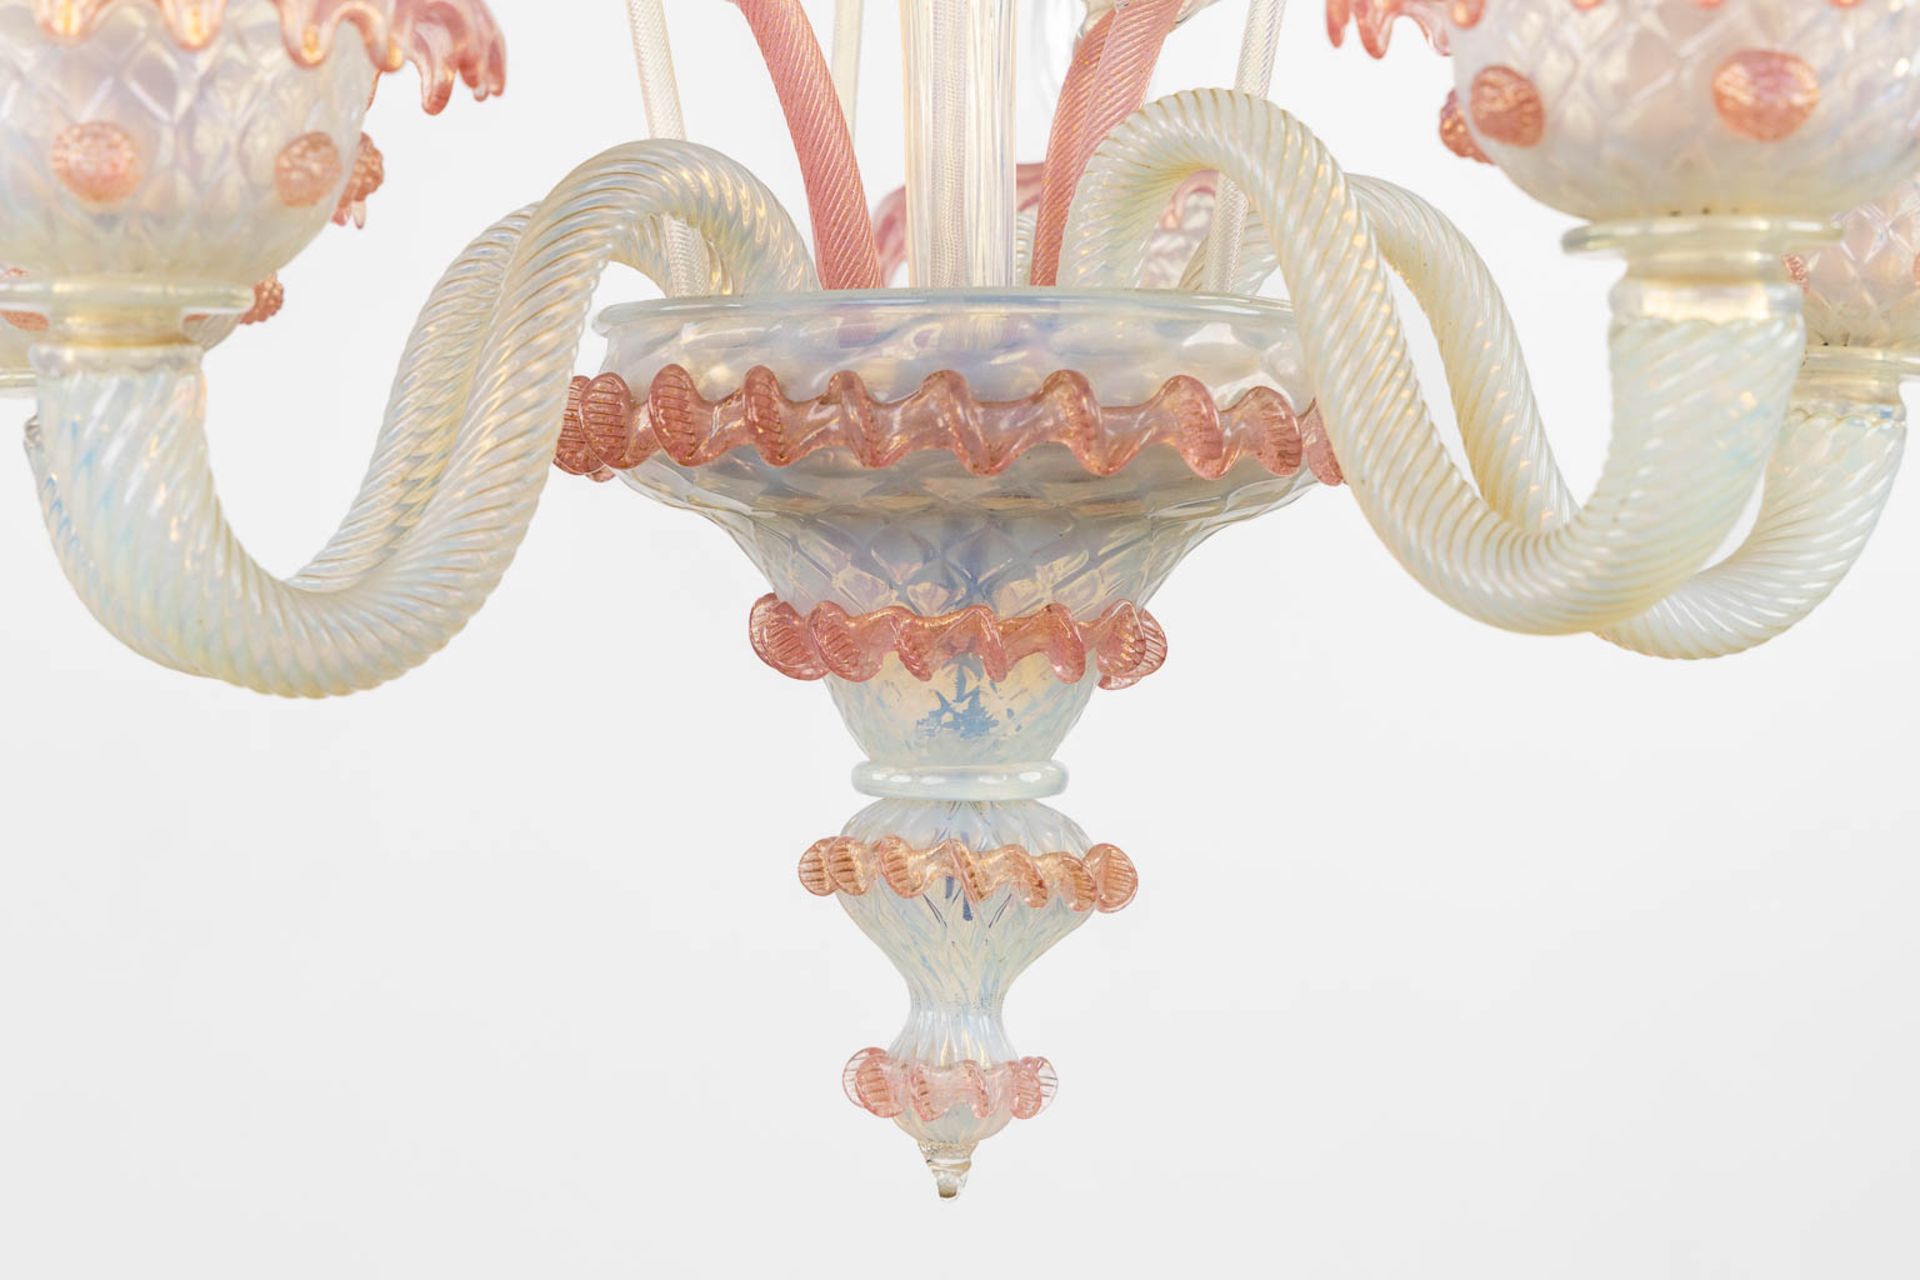 A decorative Venetian glass chandelier, red and white glass. 20th C. (H:70 x D:54 cm) - Image 7 of 12